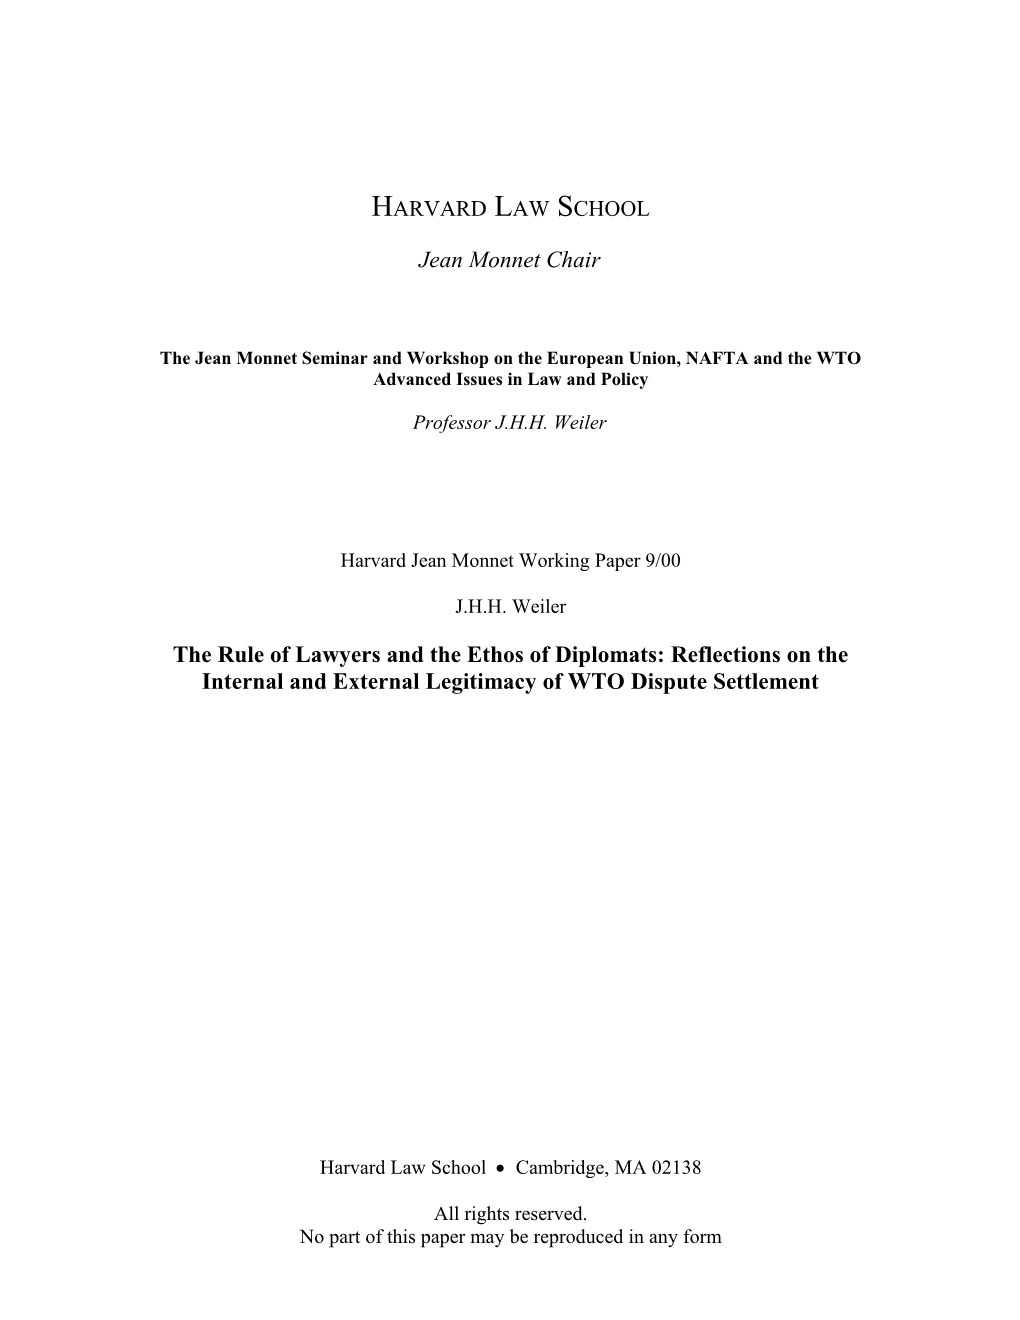 The Rule of Lawyers and the Ethos of Diplomats: Reflections on the Internal and External